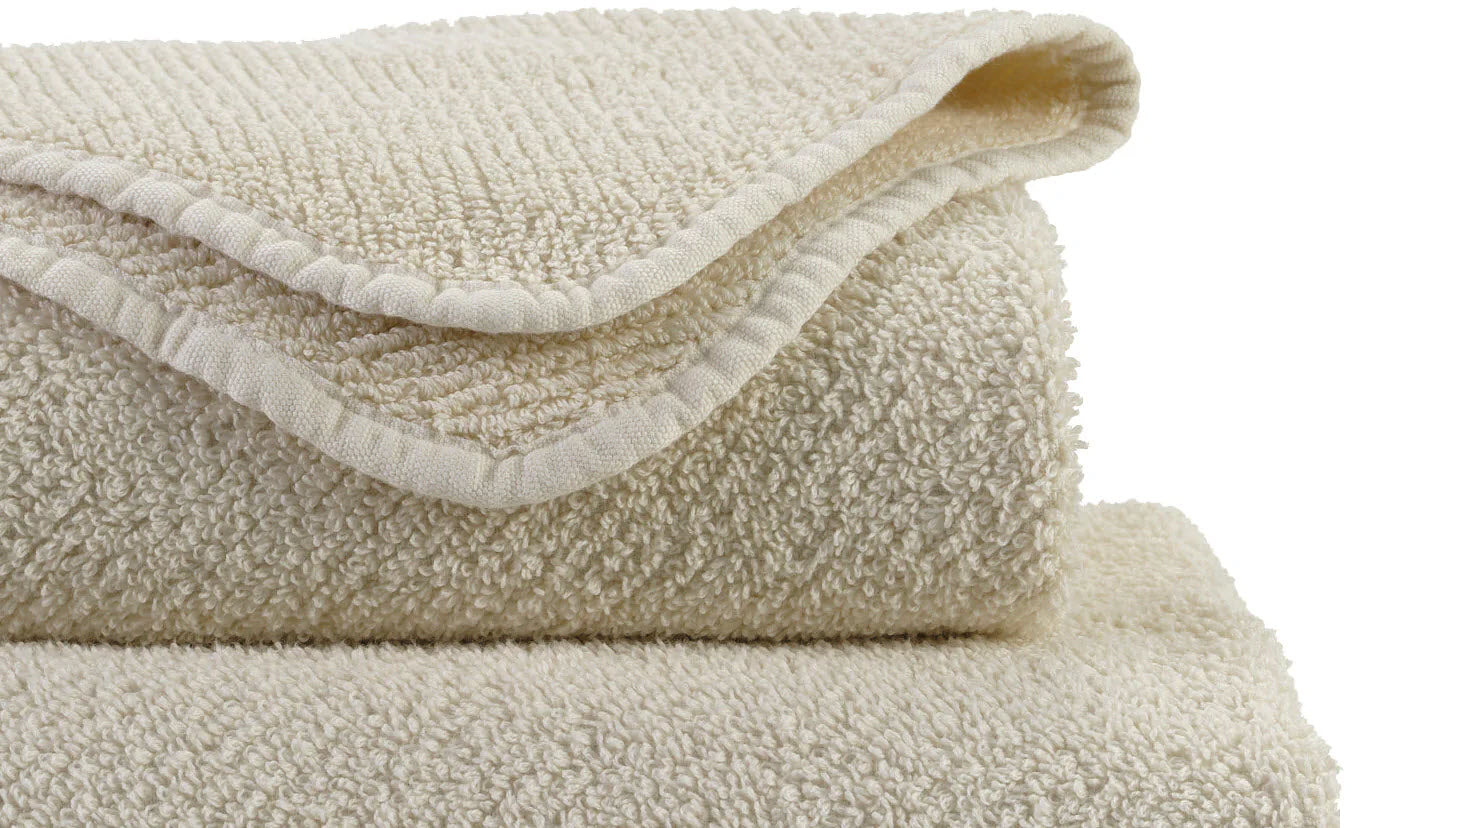 Abyss Twill Towels feature a distinctive lined texture